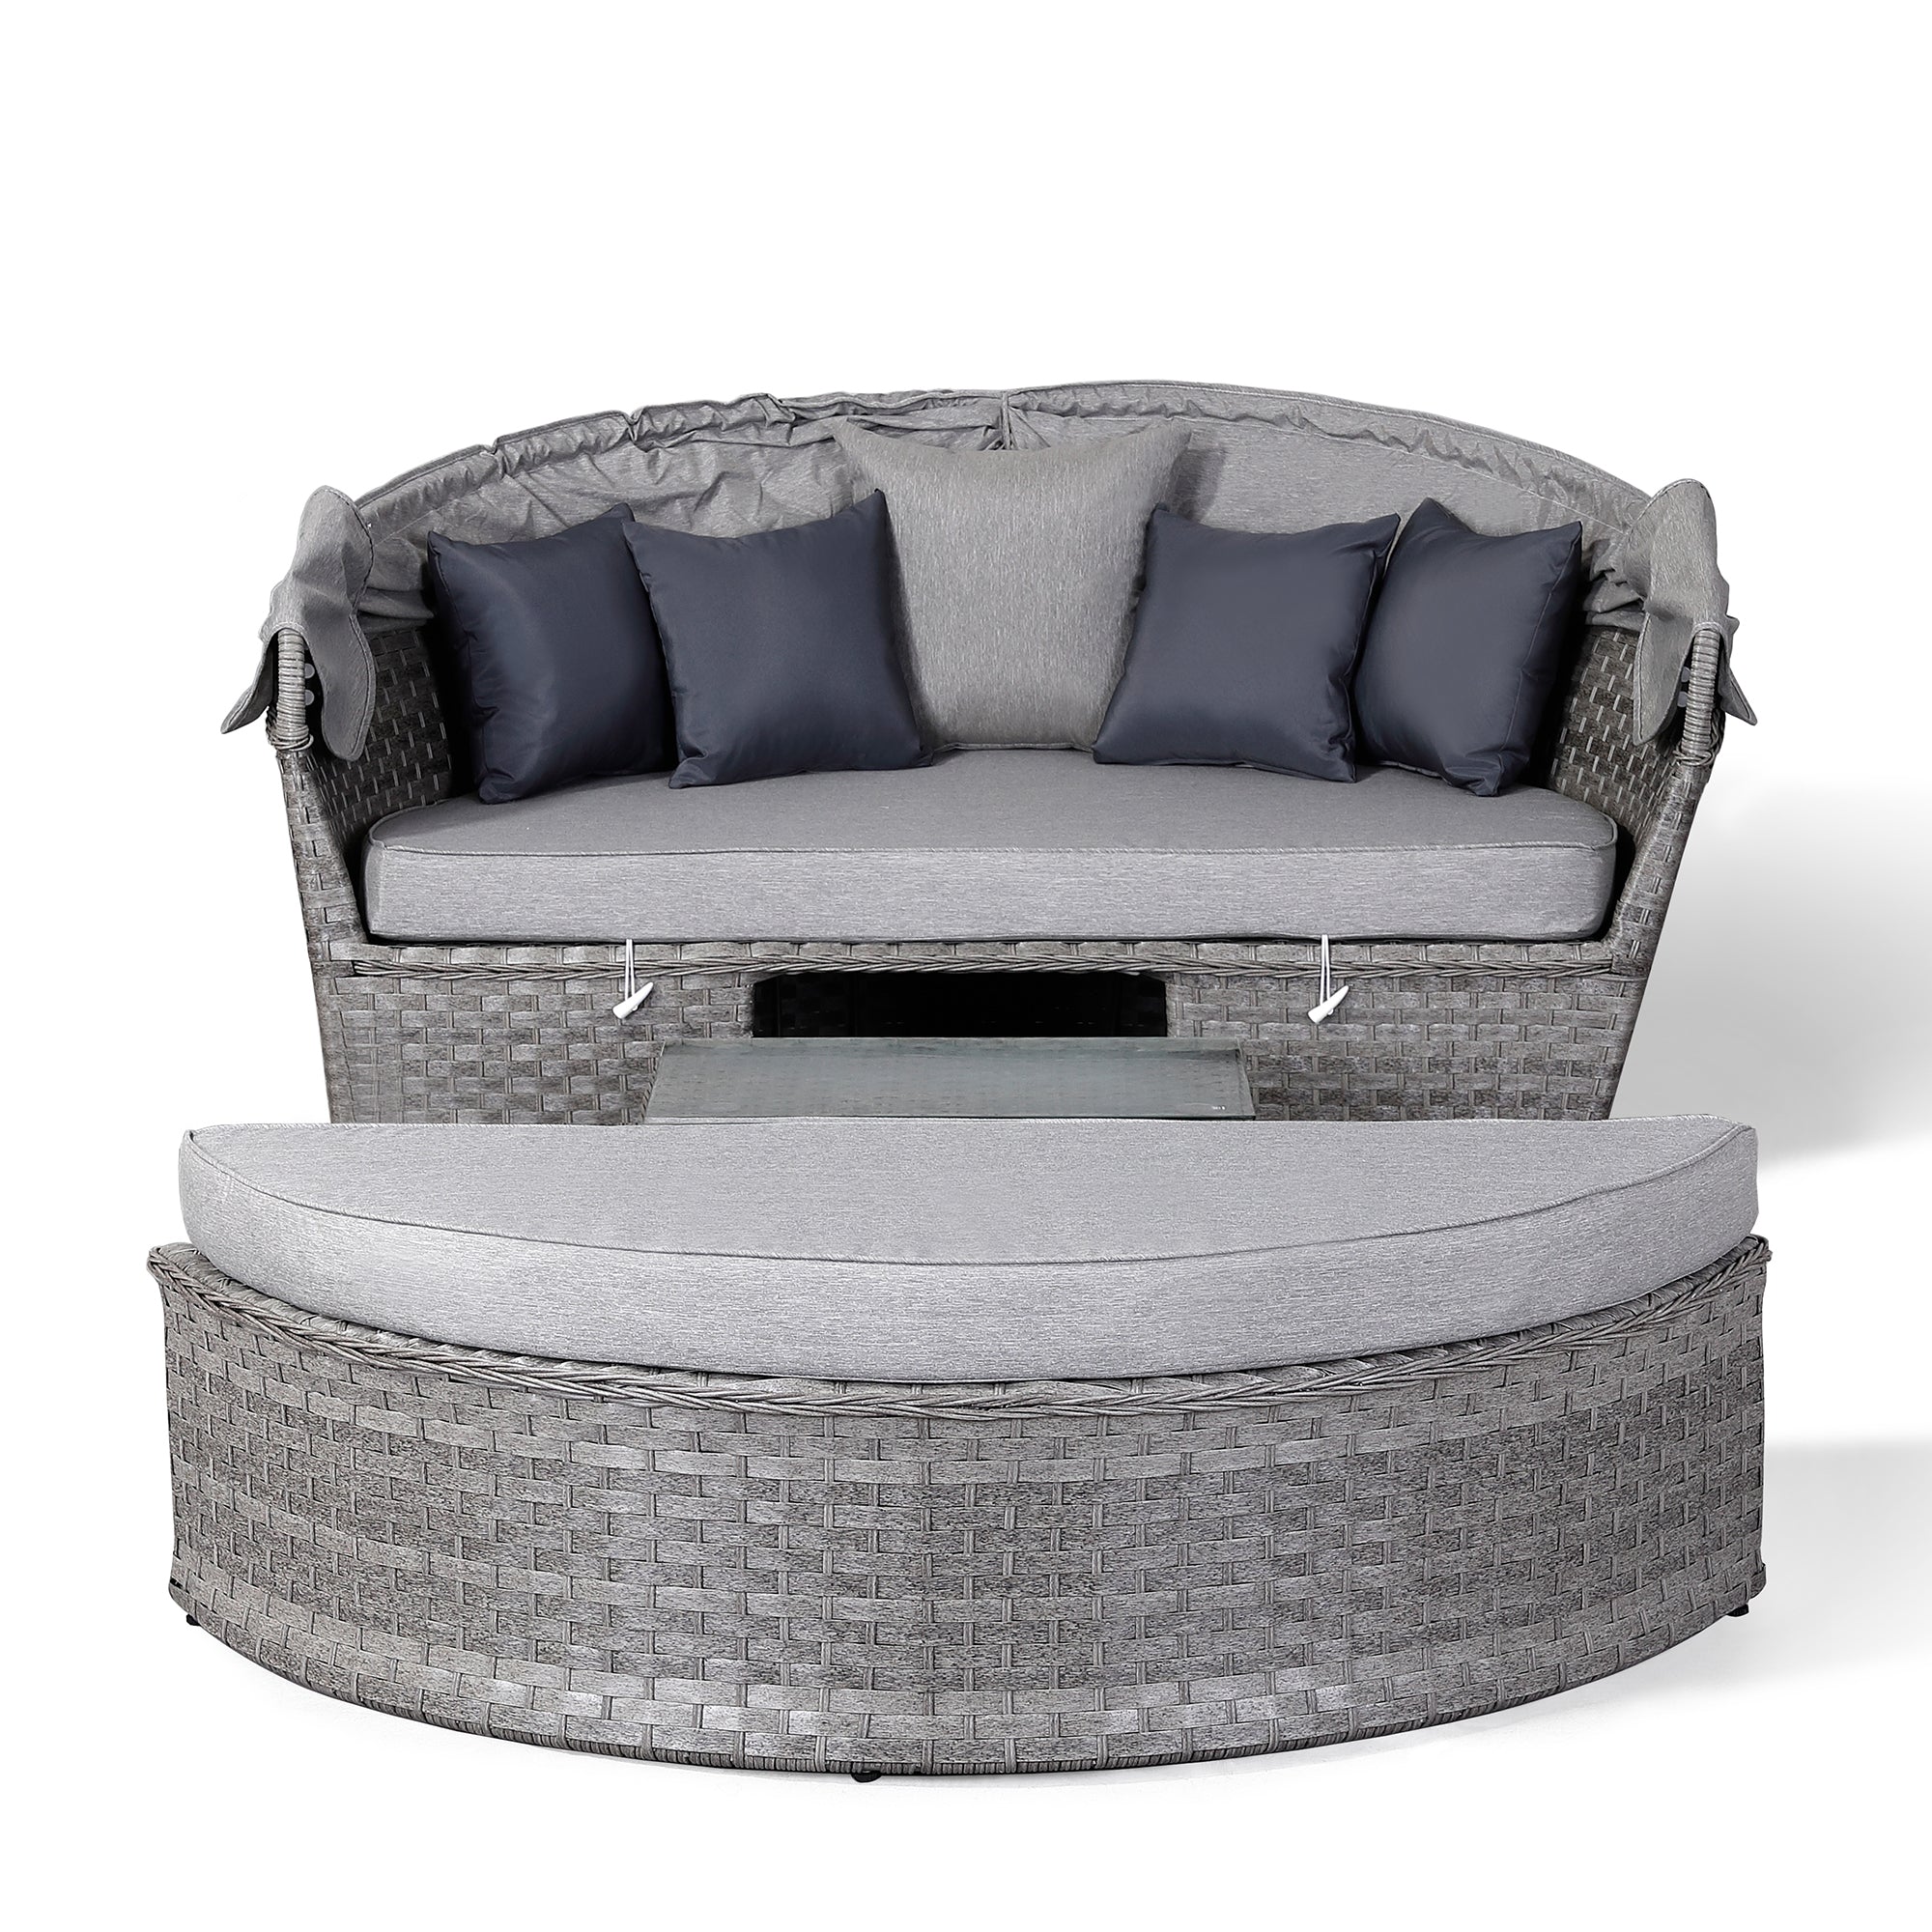 Ascot Daybed with Canopy in Stone Grey Weave and Grey Cushions